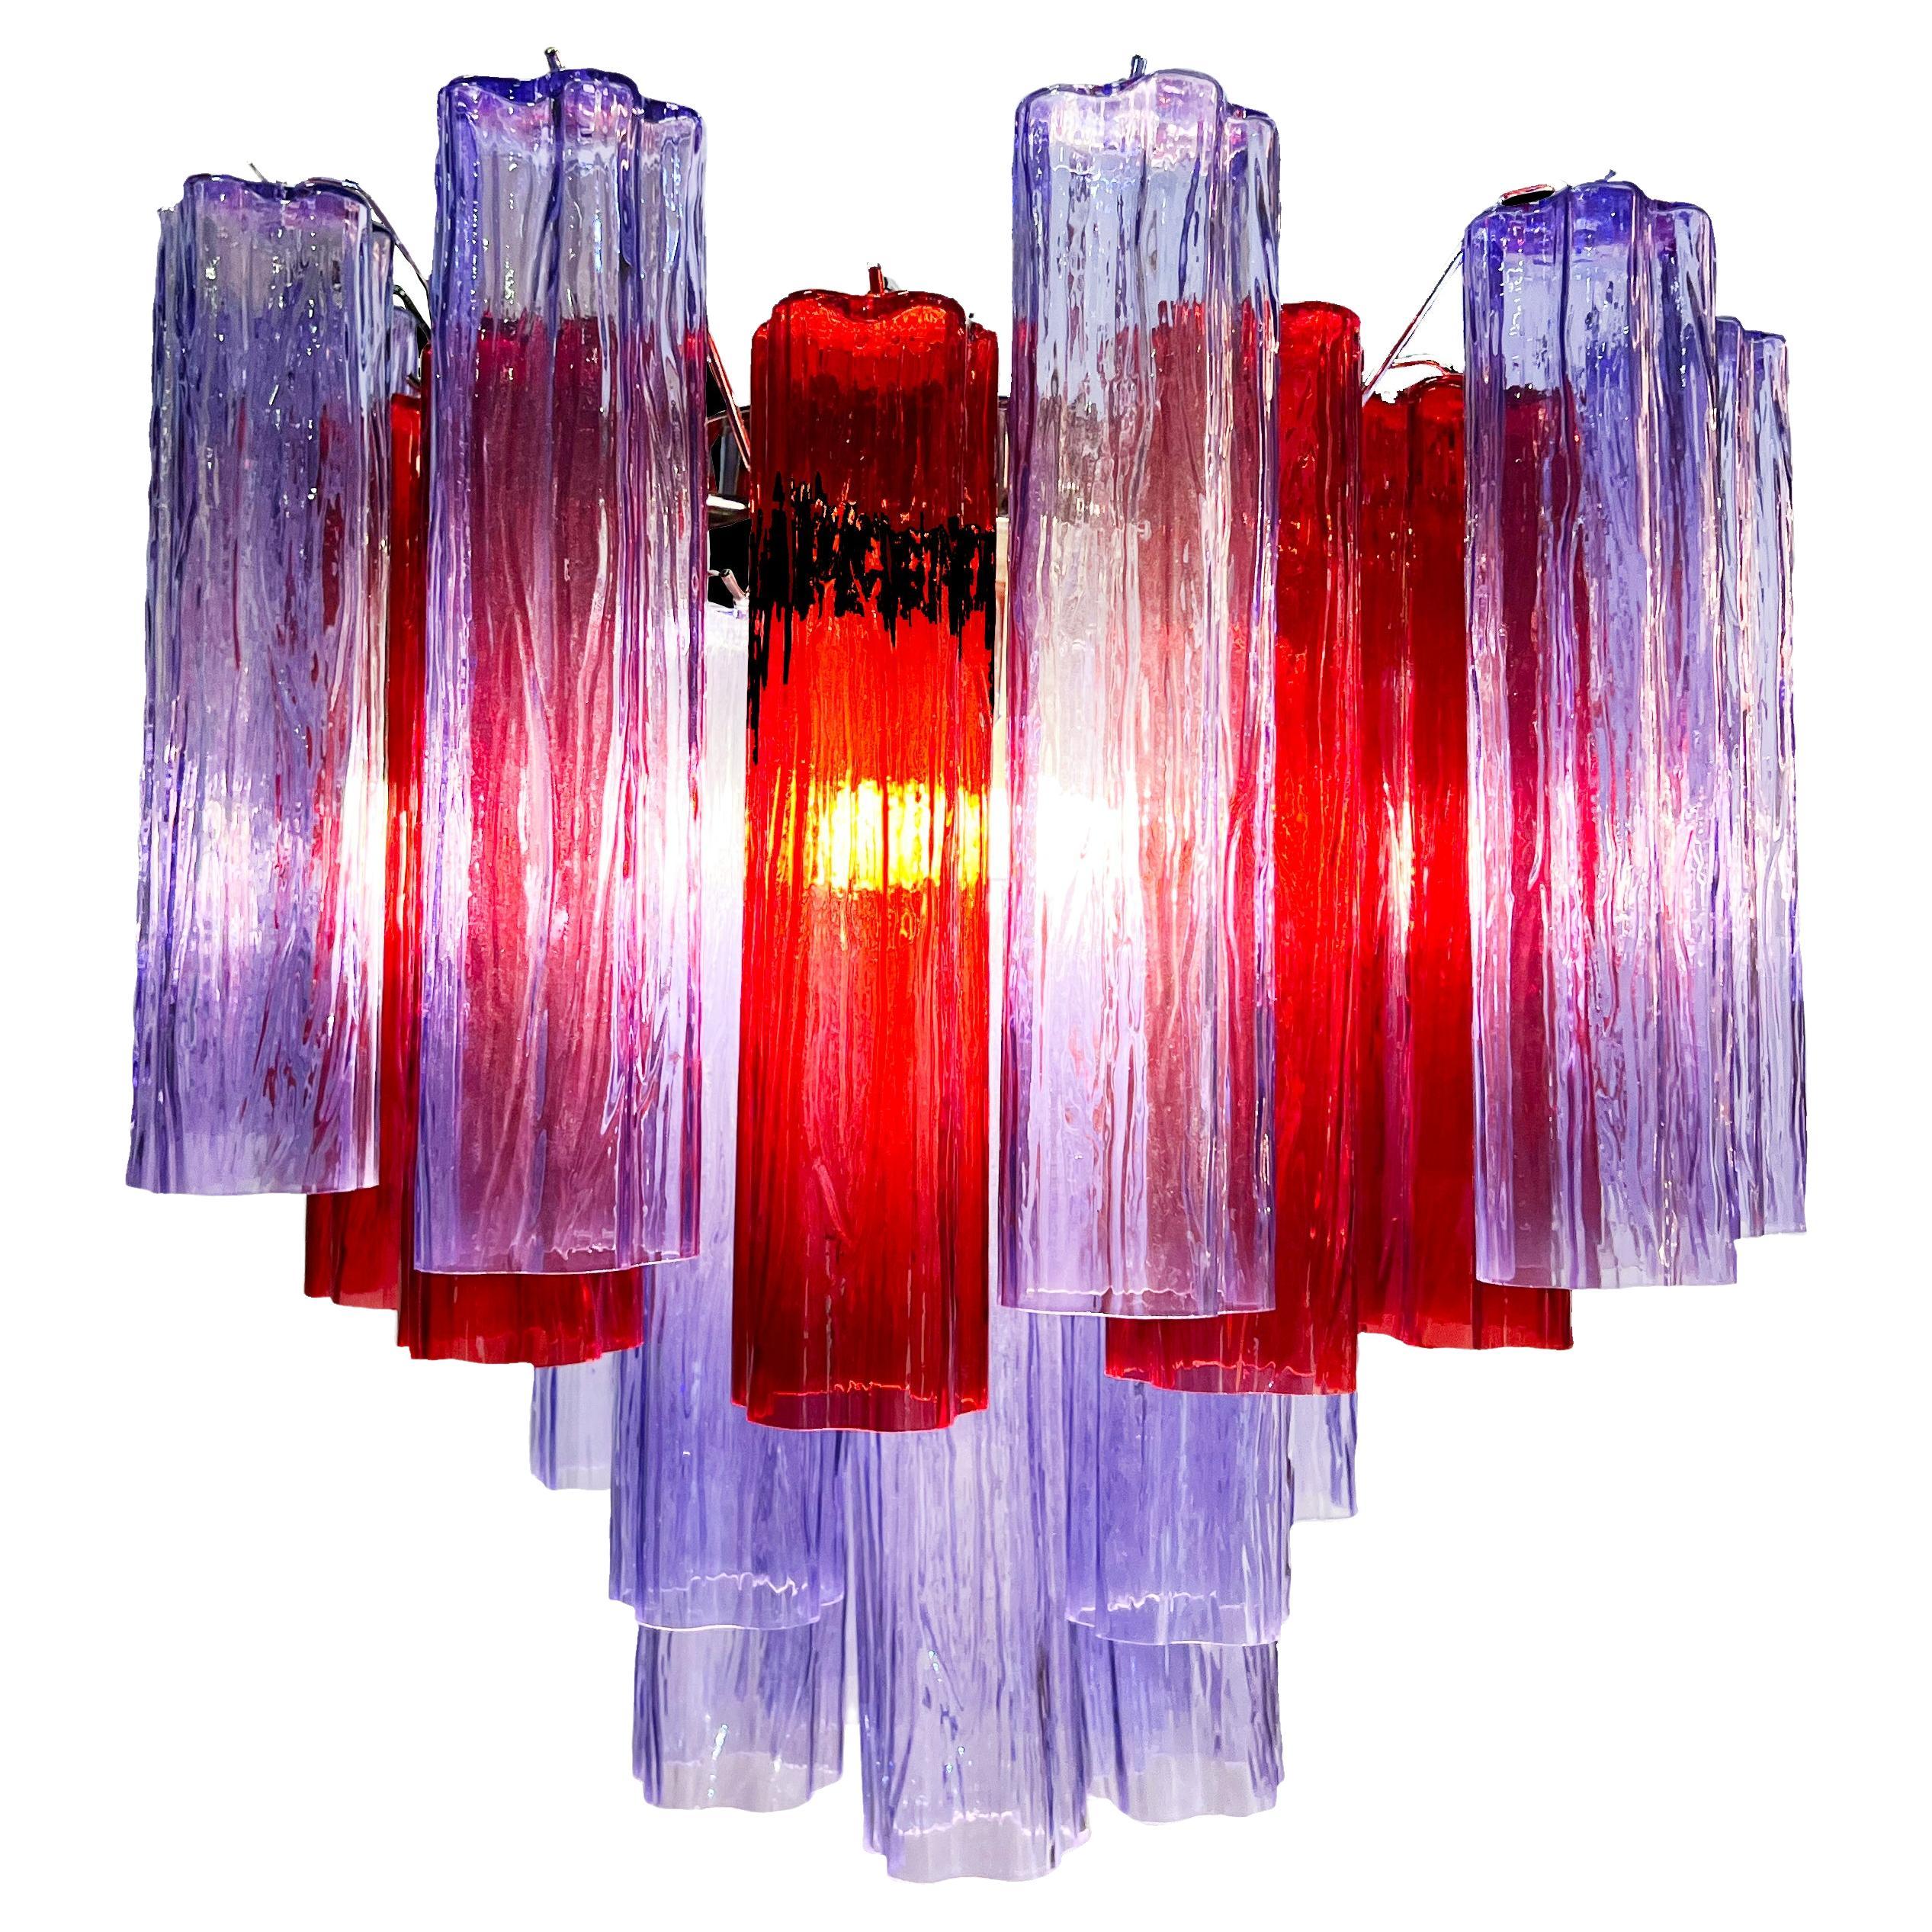 Fascinating Murano chandeliers. It is composed of 30 star shaped panes of pure murano glass. The height is adjustable according to the height of the ceiling. At no extra cost we will replace the original lamp holders with those in use in the USA.